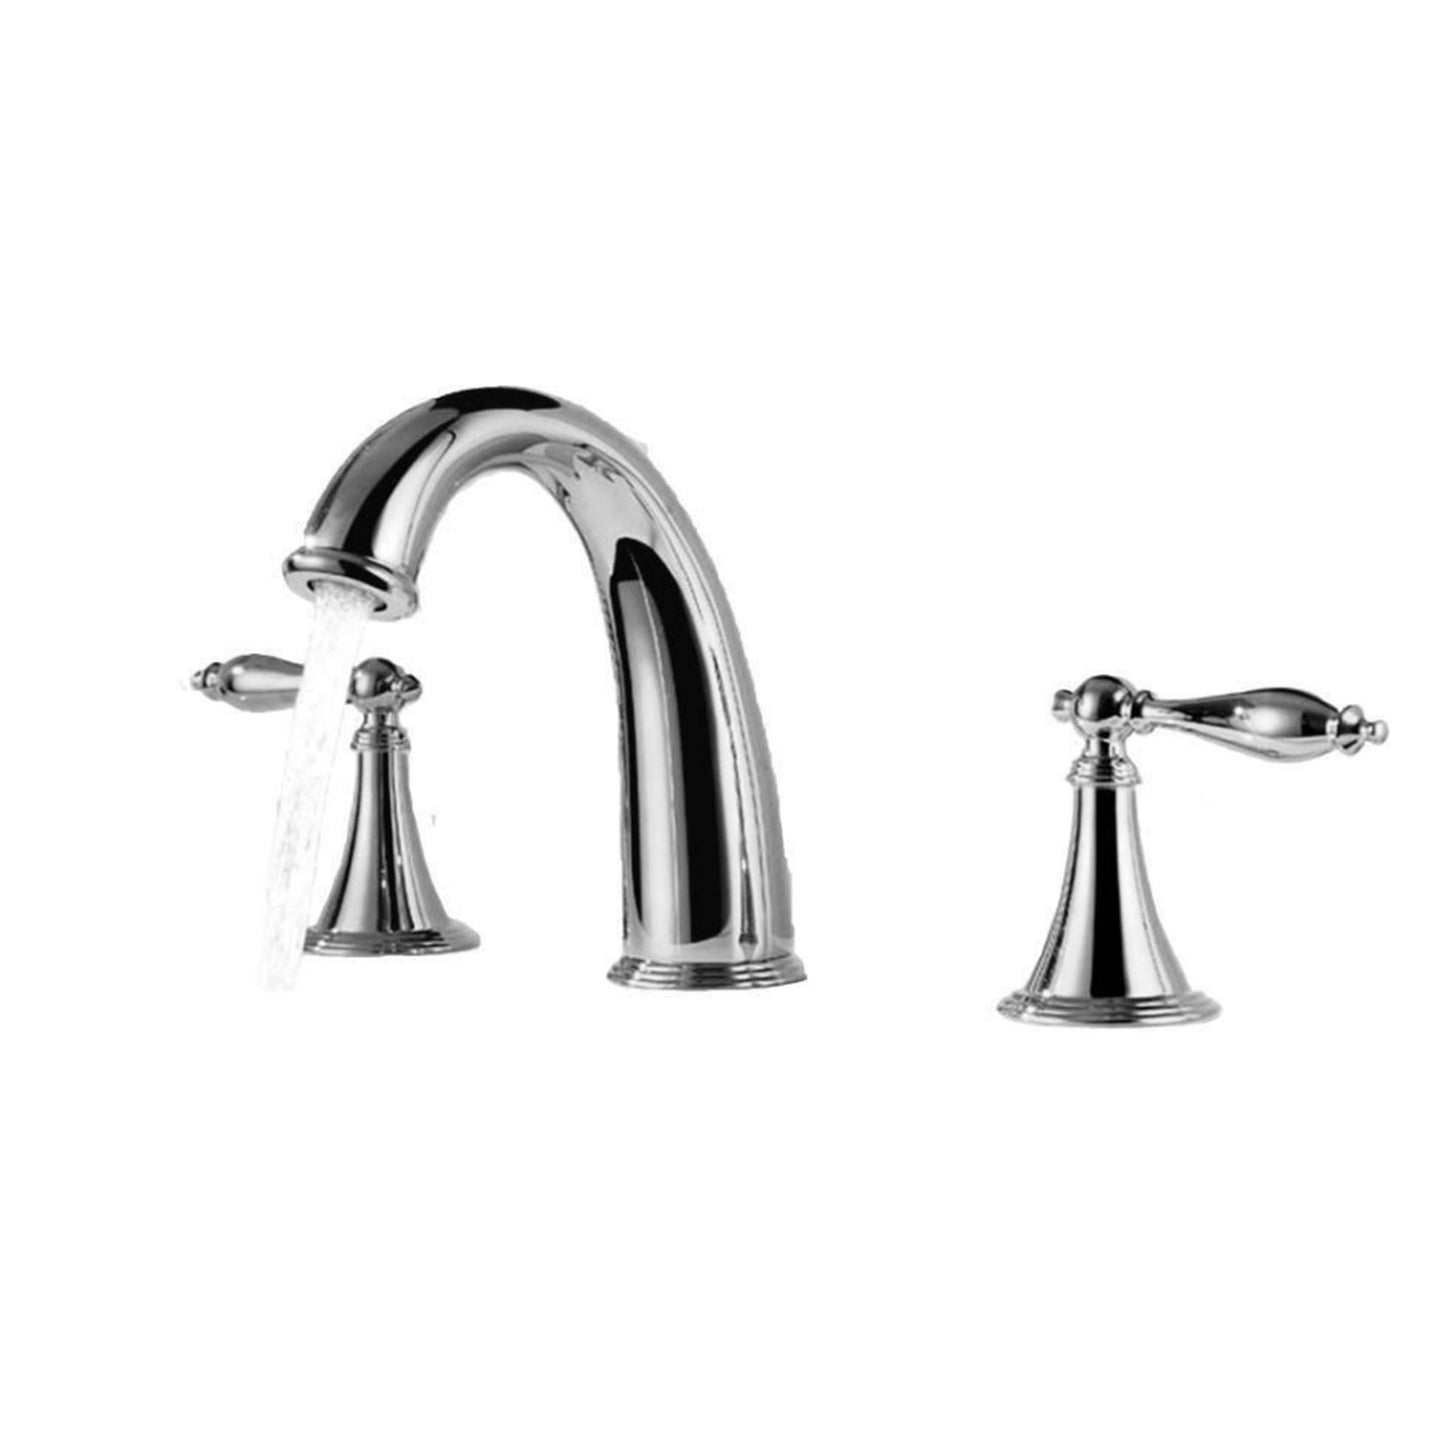 Duko FC312001-BN Two Handle Faucet for 8" Hole in Brushed Nickel